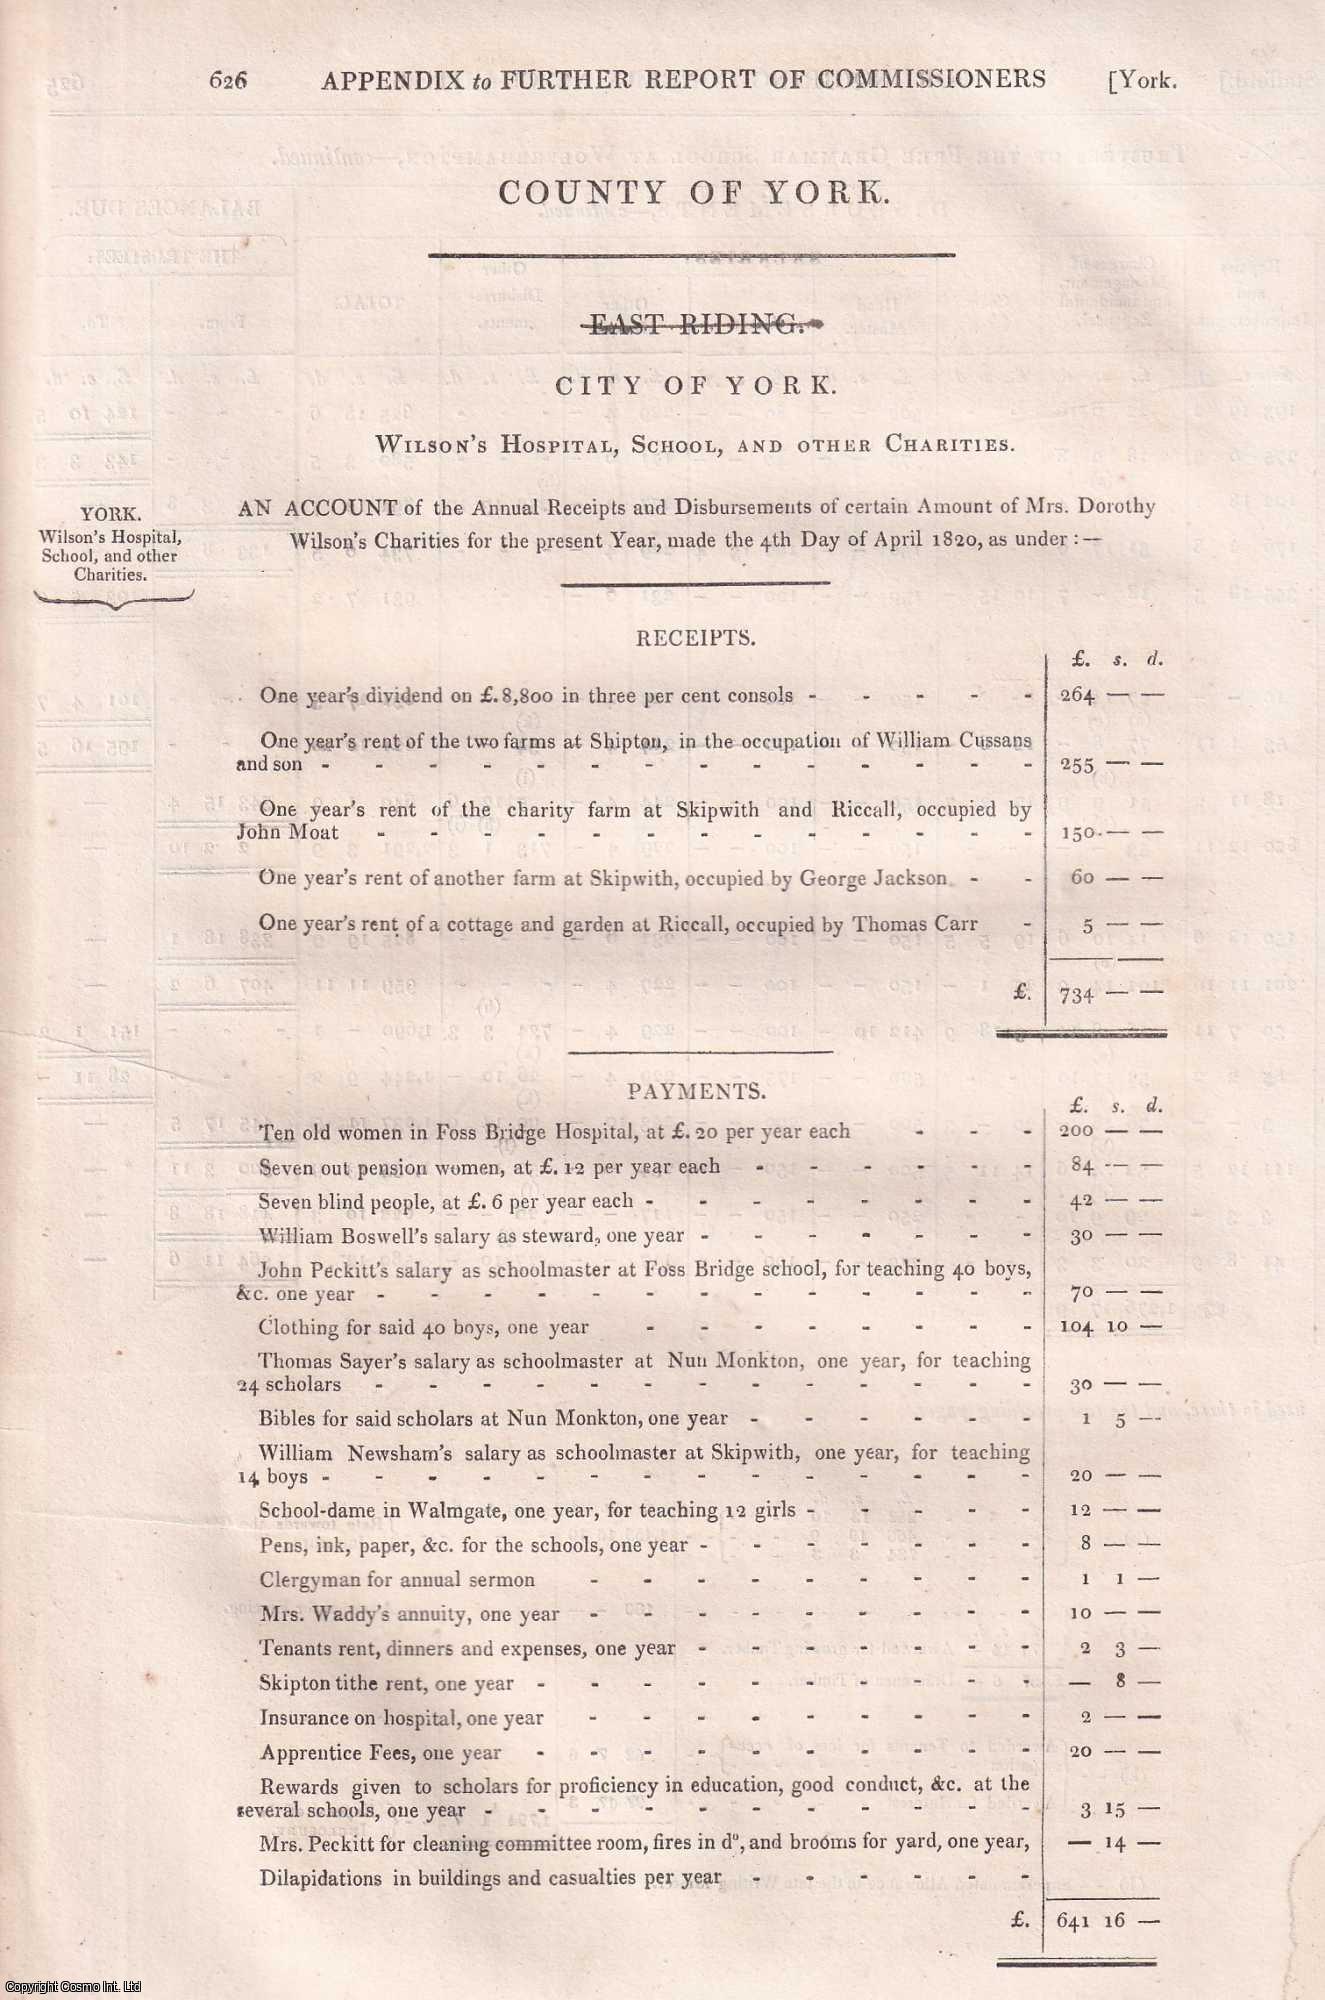 Charity Commissioners - 1839. City of York, and Parish of Tadcaster, Yorkshire : An original article from the Reports of the Commissioners to Inquire Concerning Charities & Education of the Poor in England and Wales.